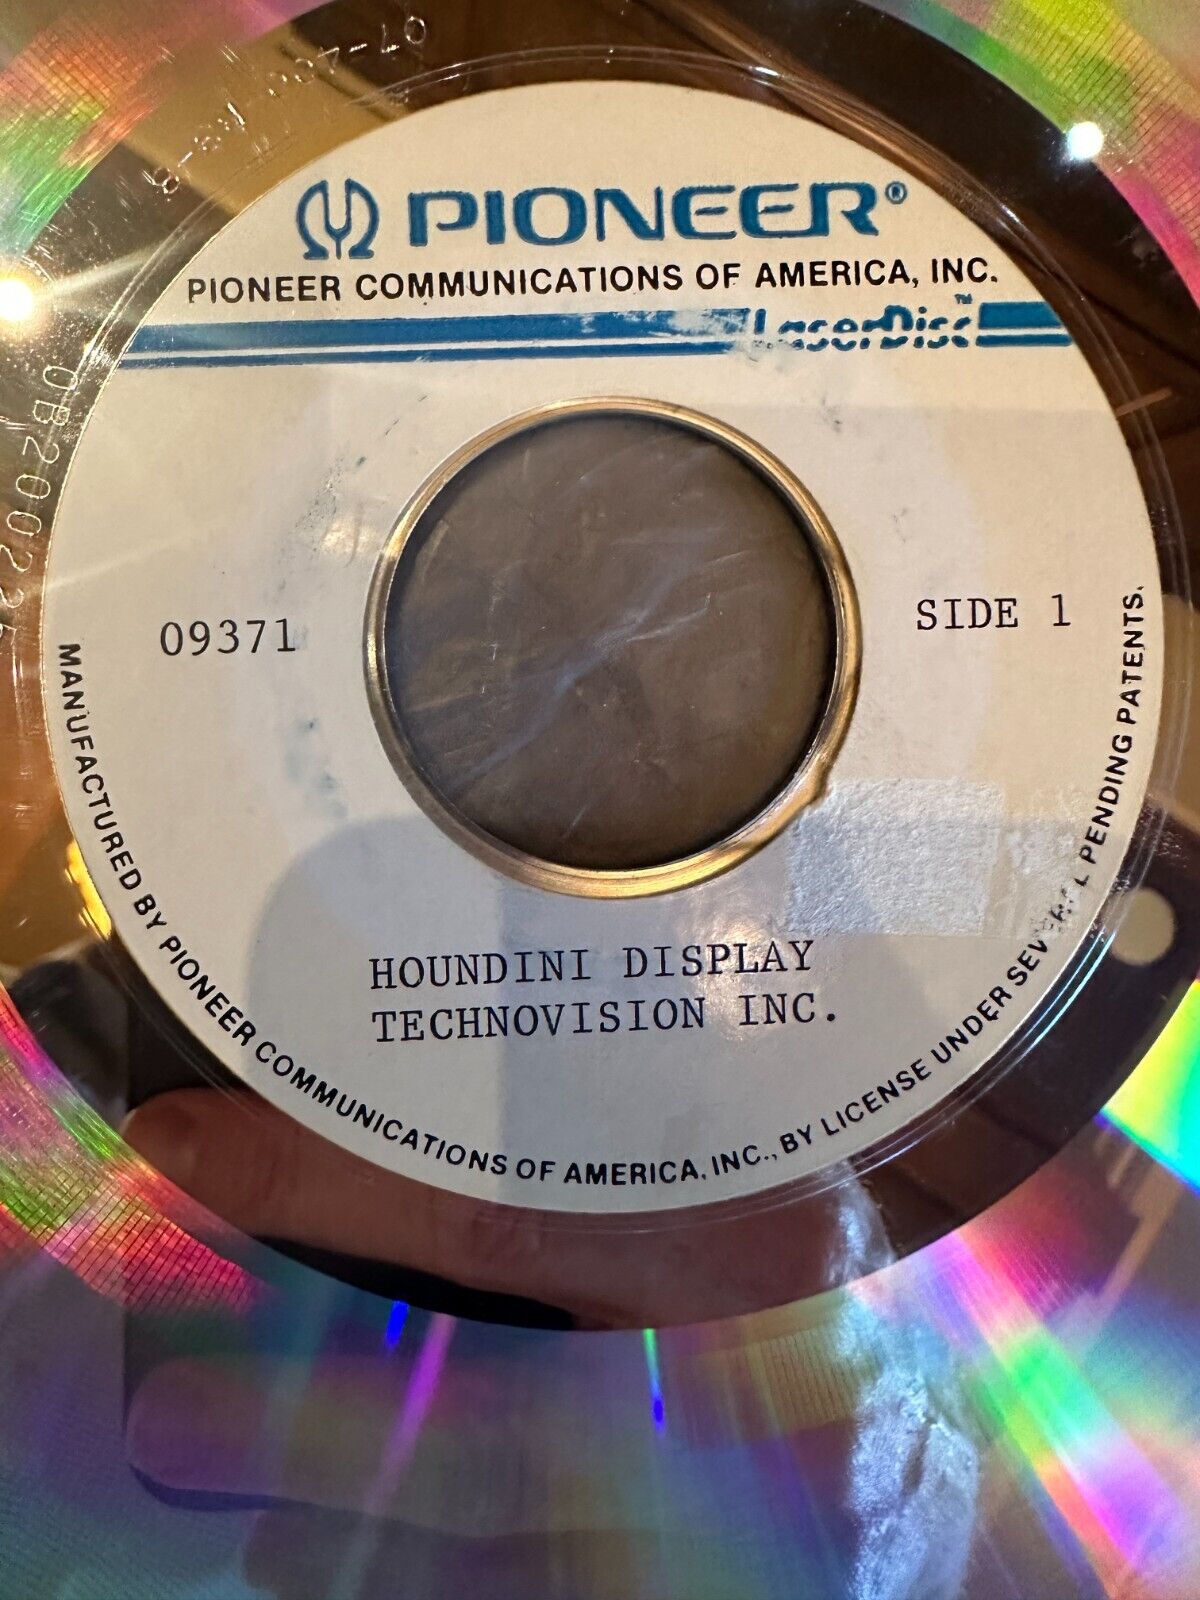 Laserdisc 12 inch from the Houdini Magical Hall of Fame in Niagara Falls Canada